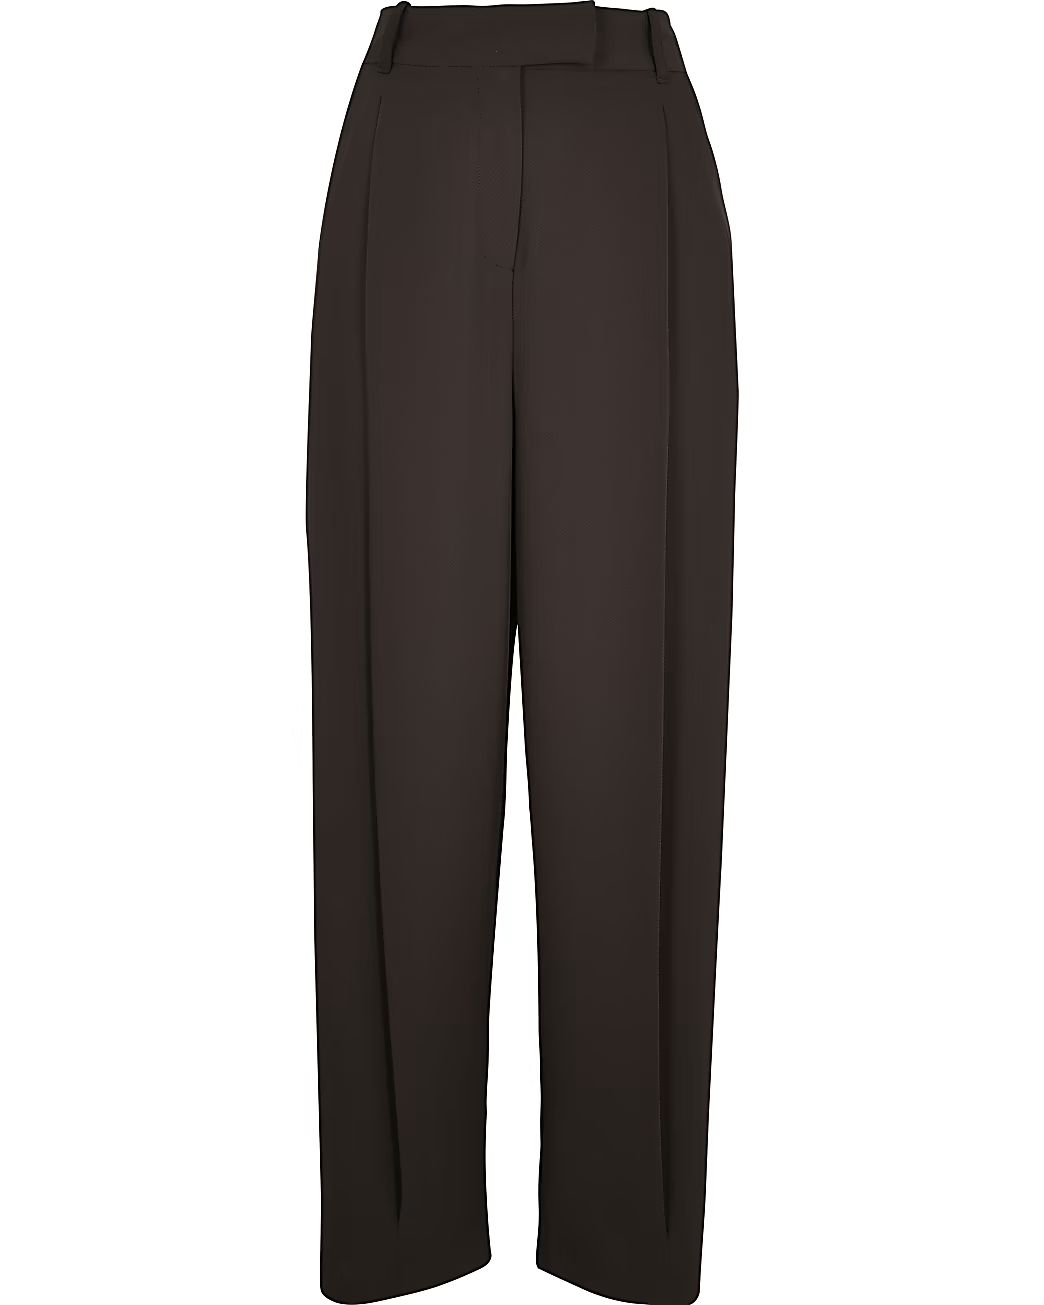 Brown pleated wide leg trousers | River Island (UK & IE)